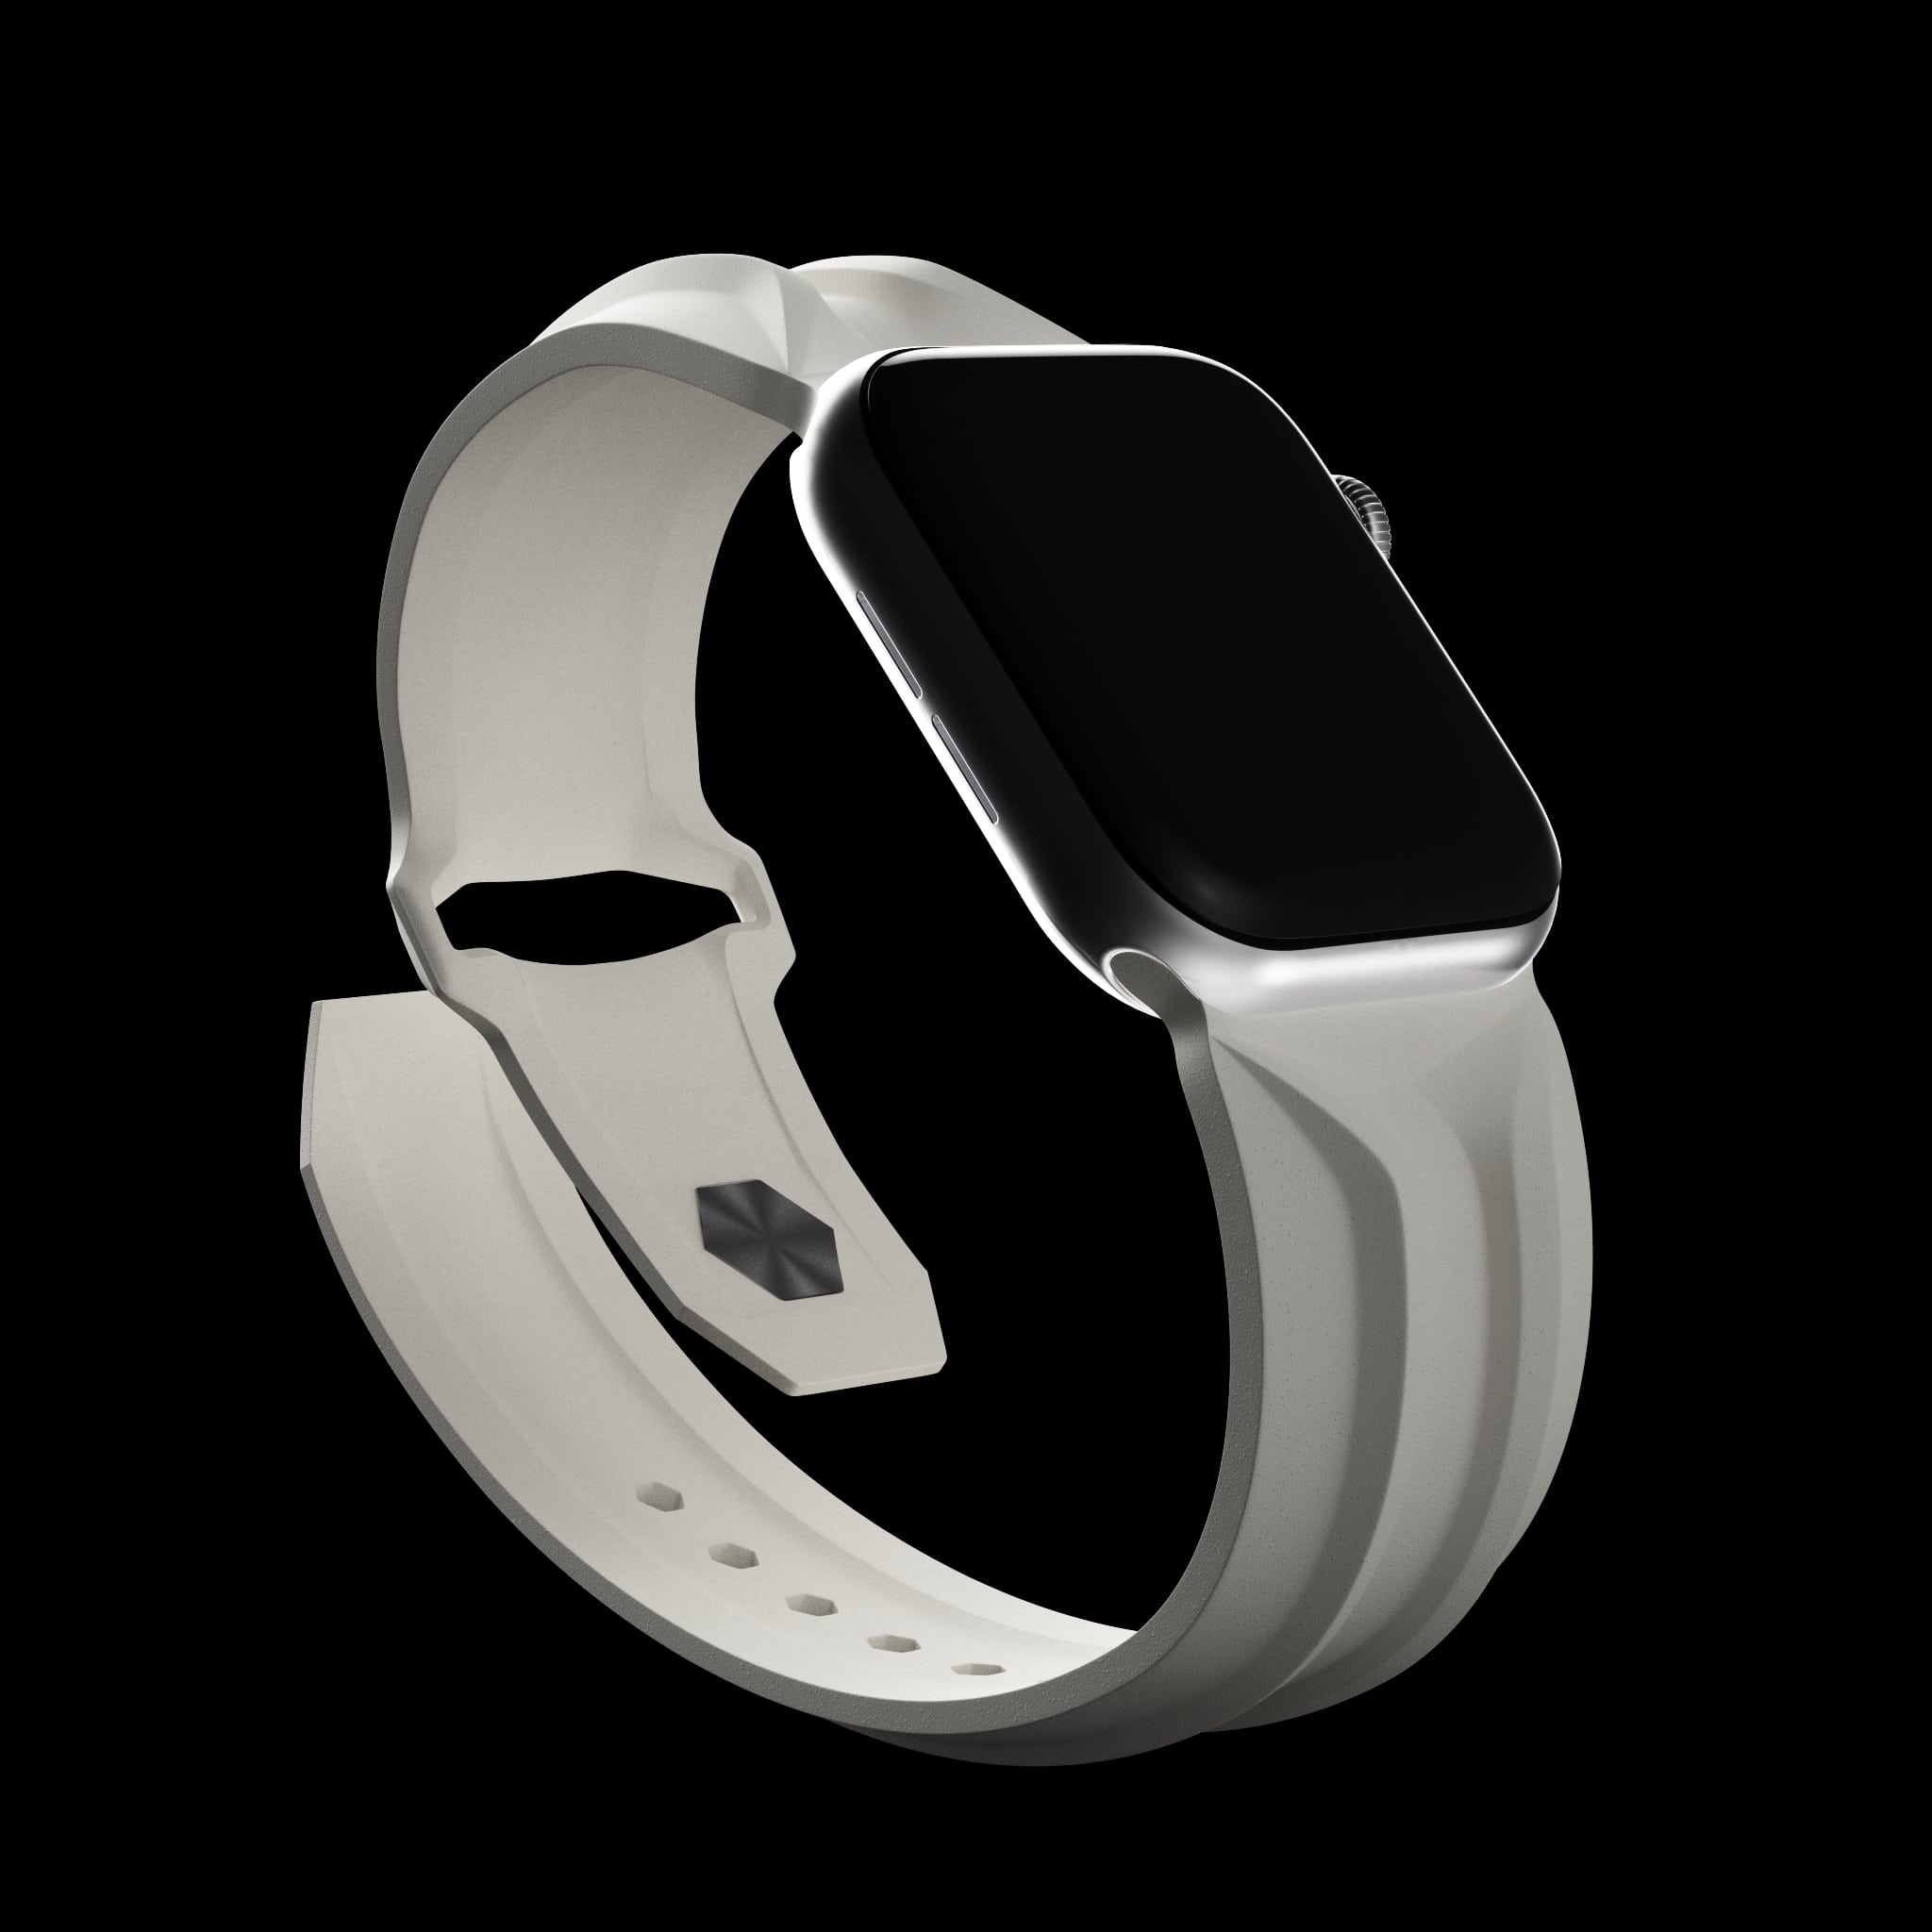 cyber band white apple watch band 44mm